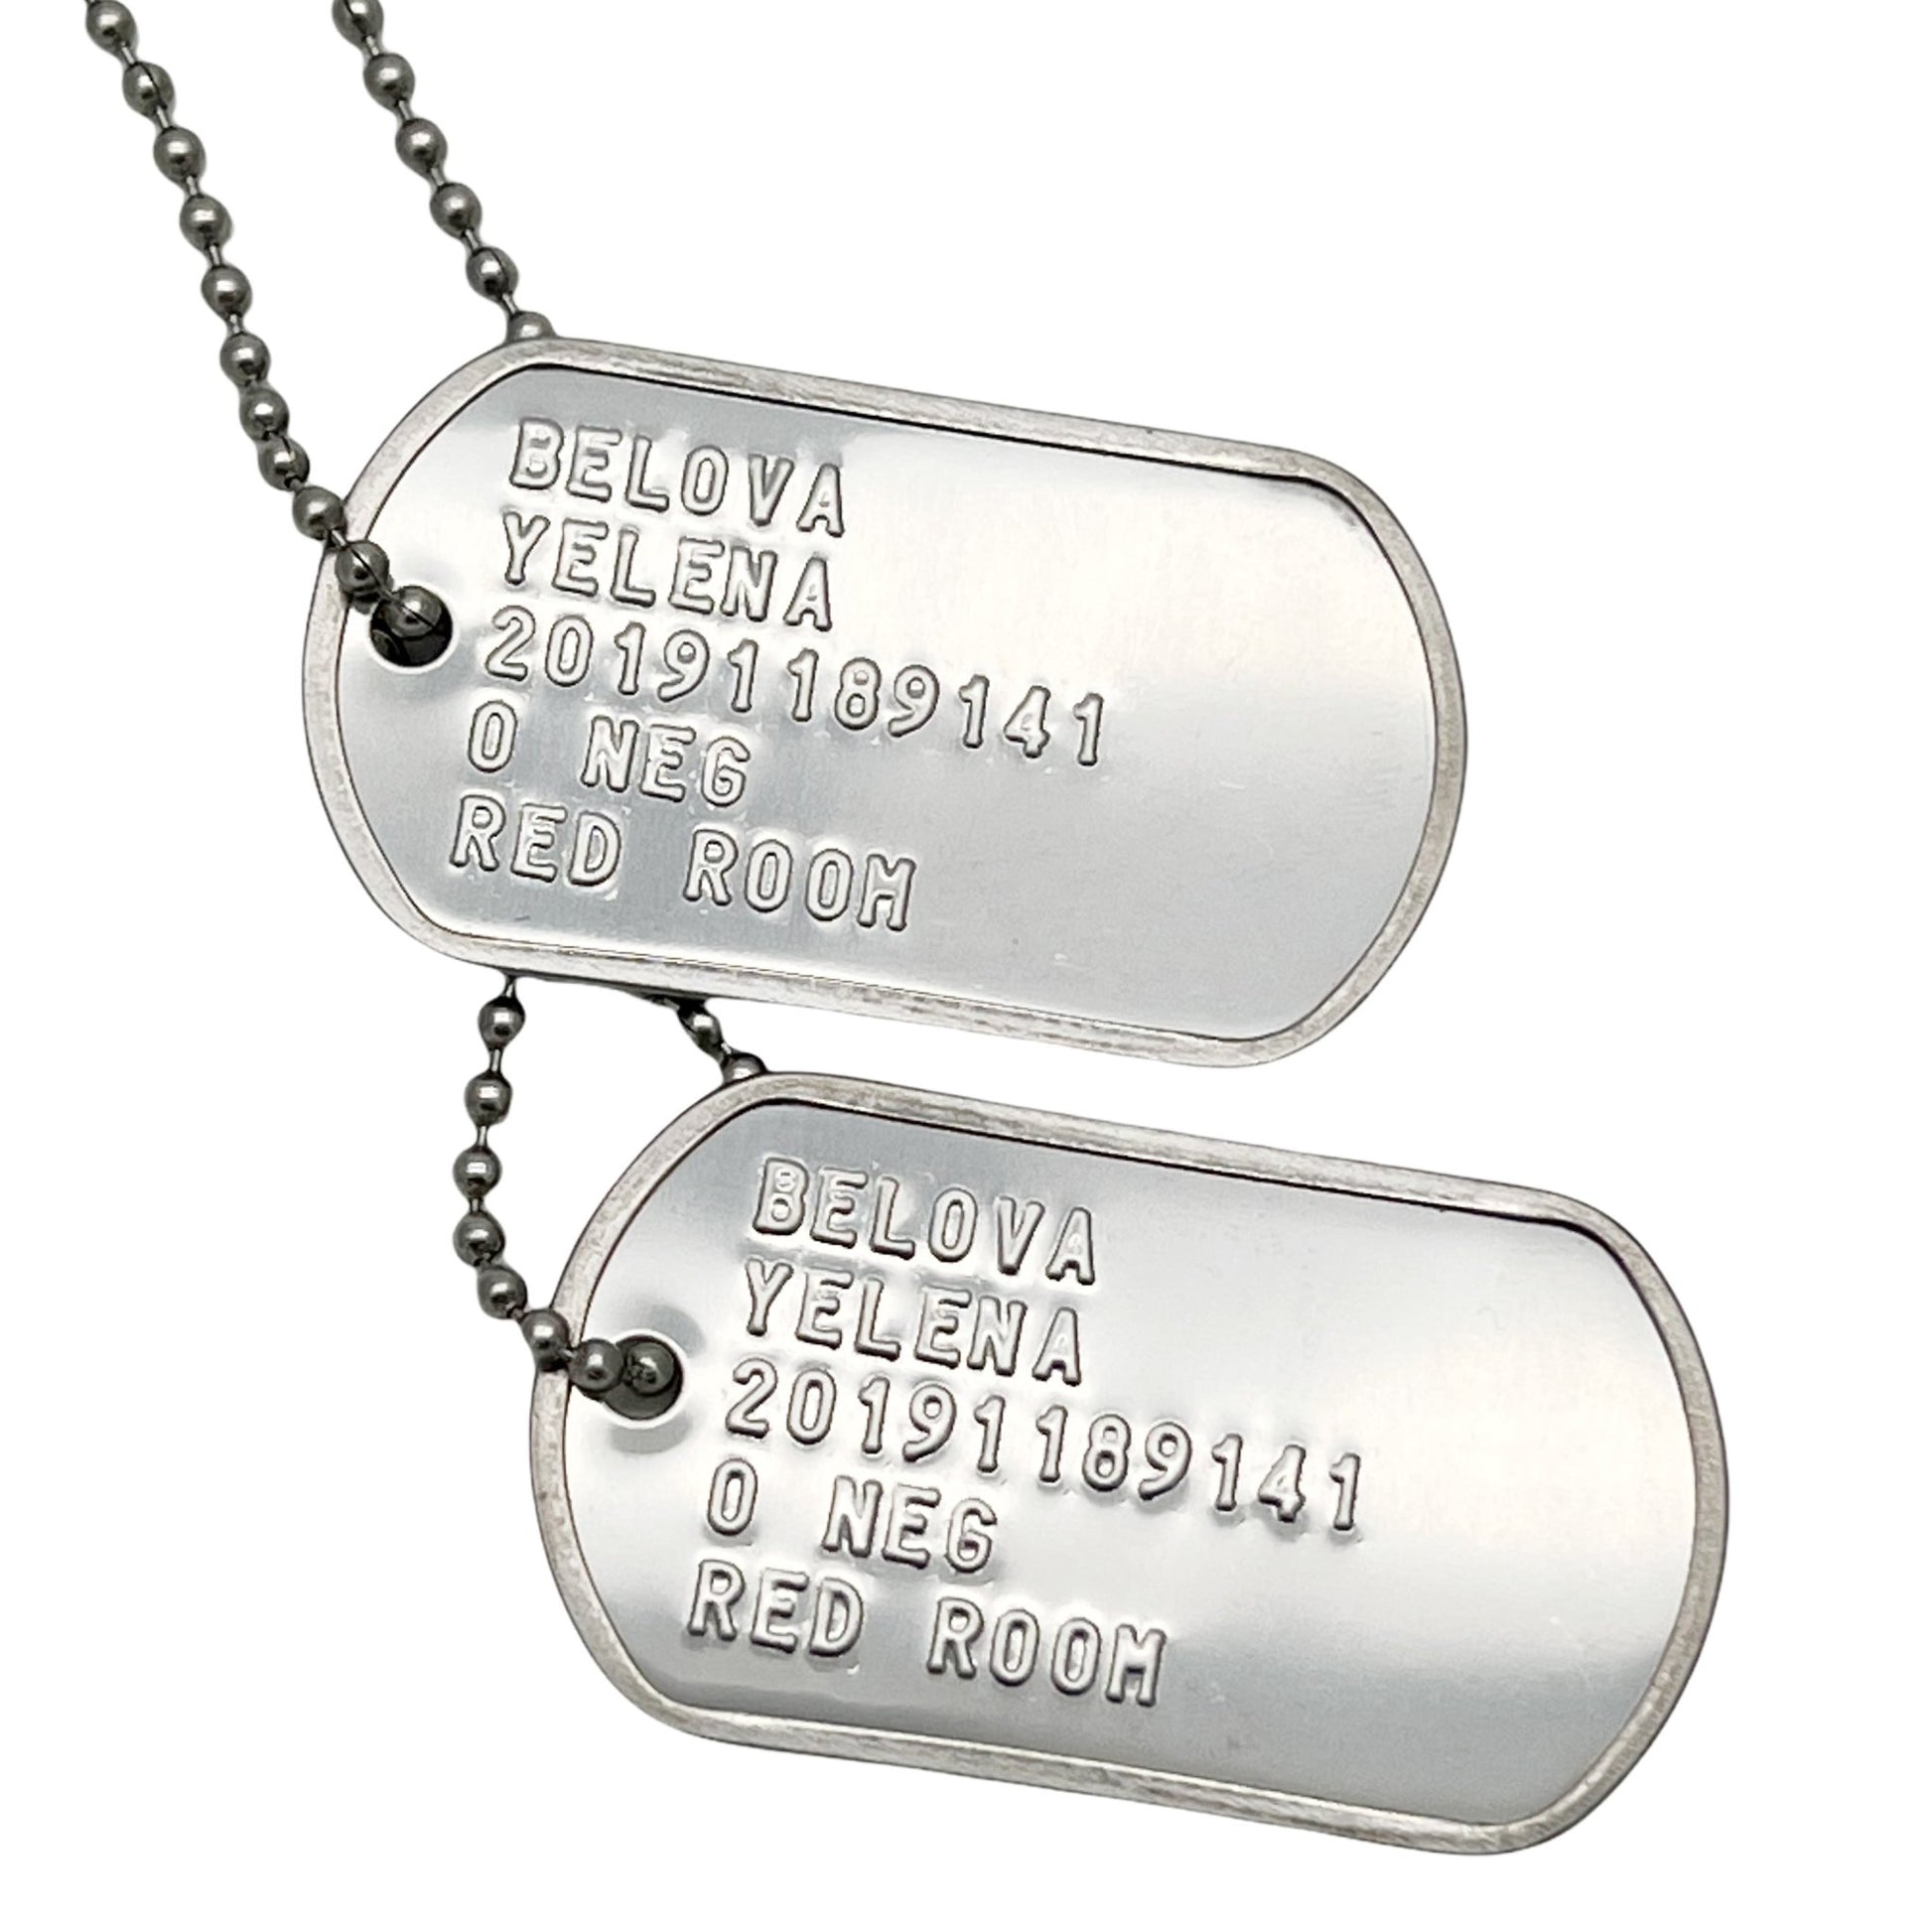 Yelena Belova 'BLACK WIDOW' Military Dog Tags - Costume Cosplay Prop Replica- Stainless Steel Chains Included - TheDogTagCo